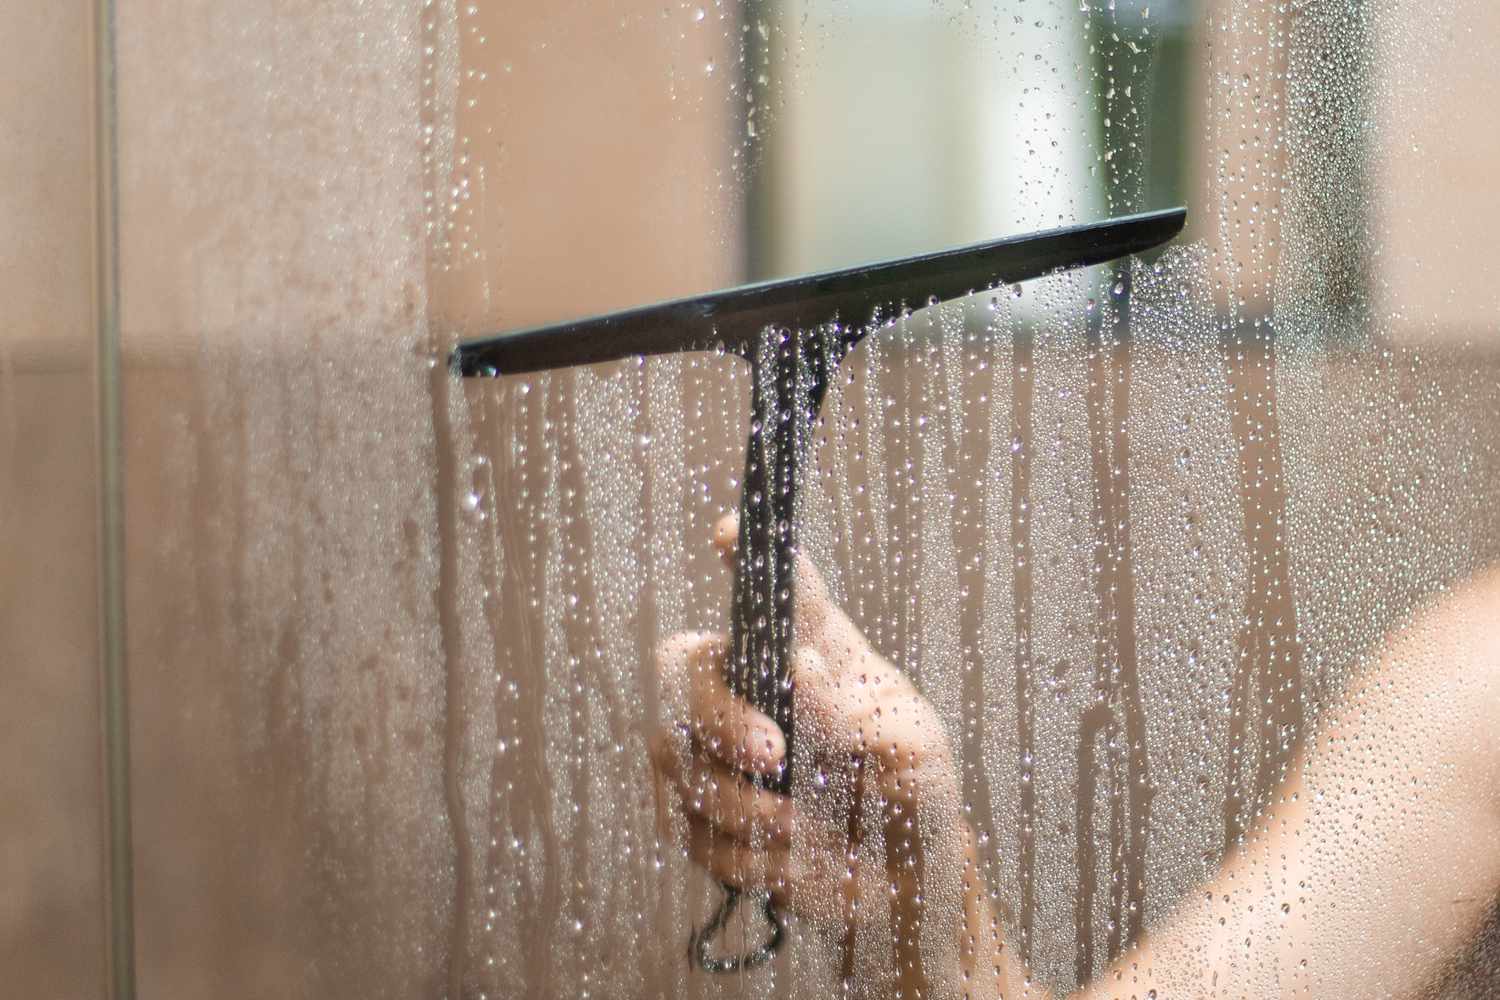 wiping down shower doors with a squeegee